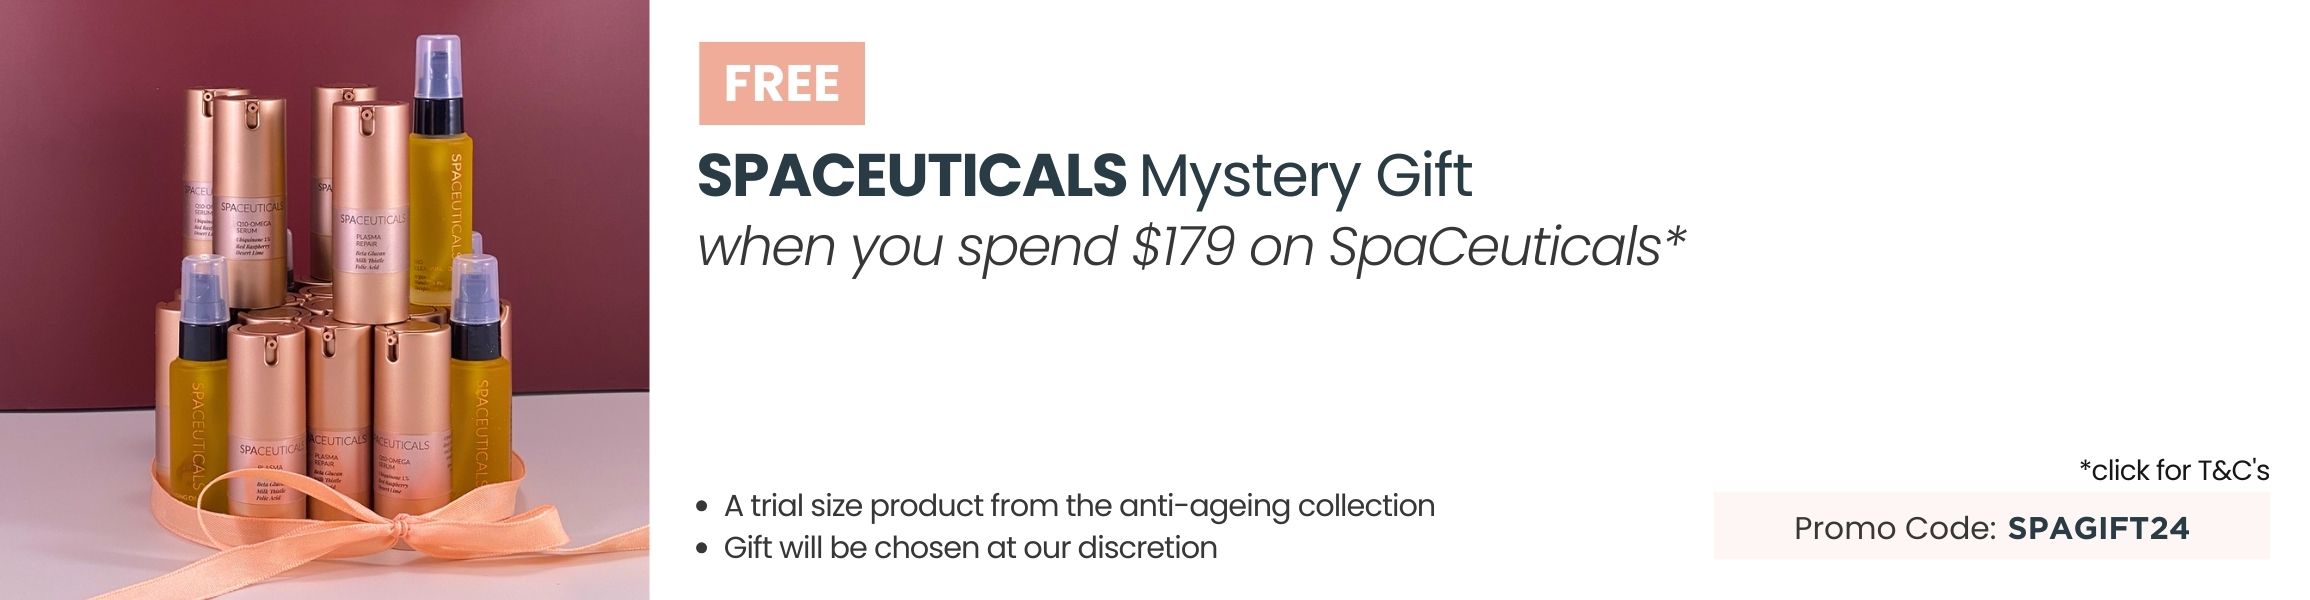 FREE SpaCeuticals Mystery Gift when you spend $179 on SpaCeuticals. Use promo code SPAGIFT24.